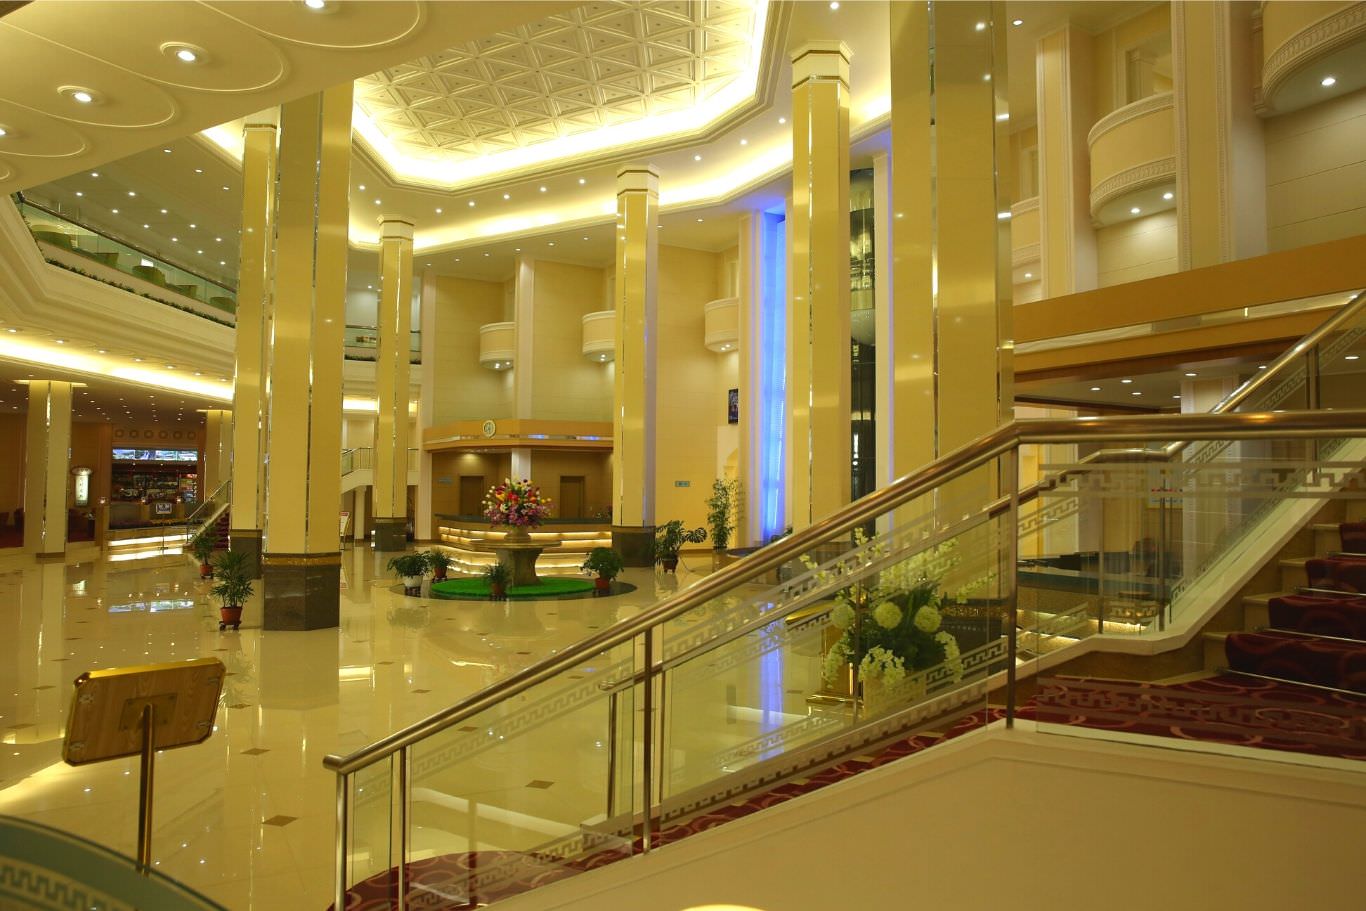 Lobby of the Hyangsan Hotel in North Korea, DPRK. This is one of the most luxurious hotels in North Korea.